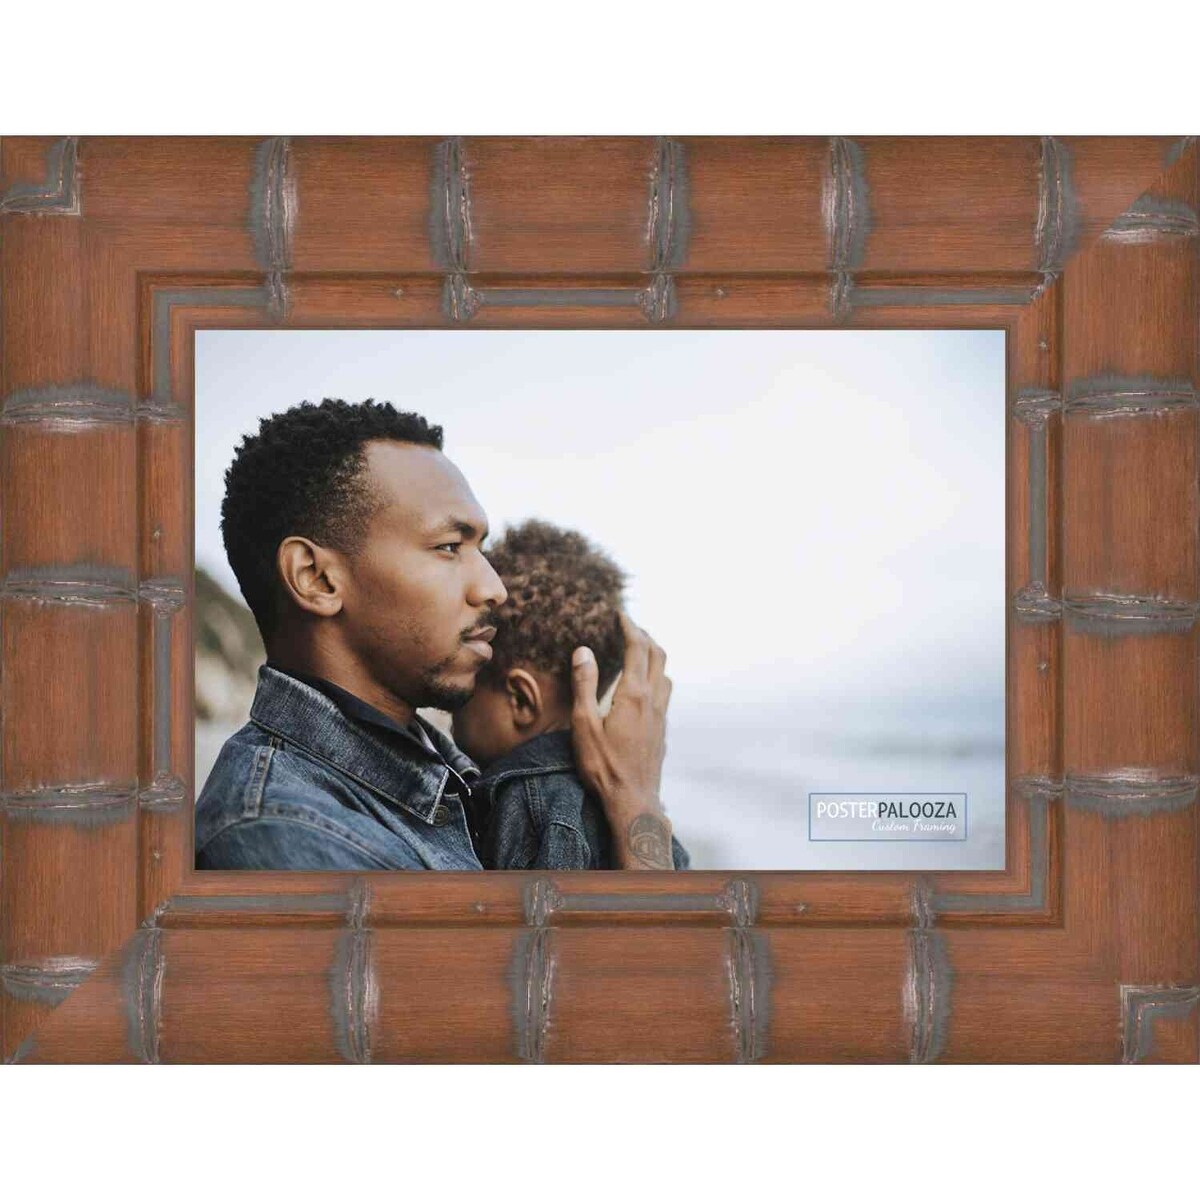 6x10 Bamboo Walnut Complete Wood Picture Frame with UV Acrylic, Foam Board  Backing, & Hardware - Bed Bath & Beyond - 38583010